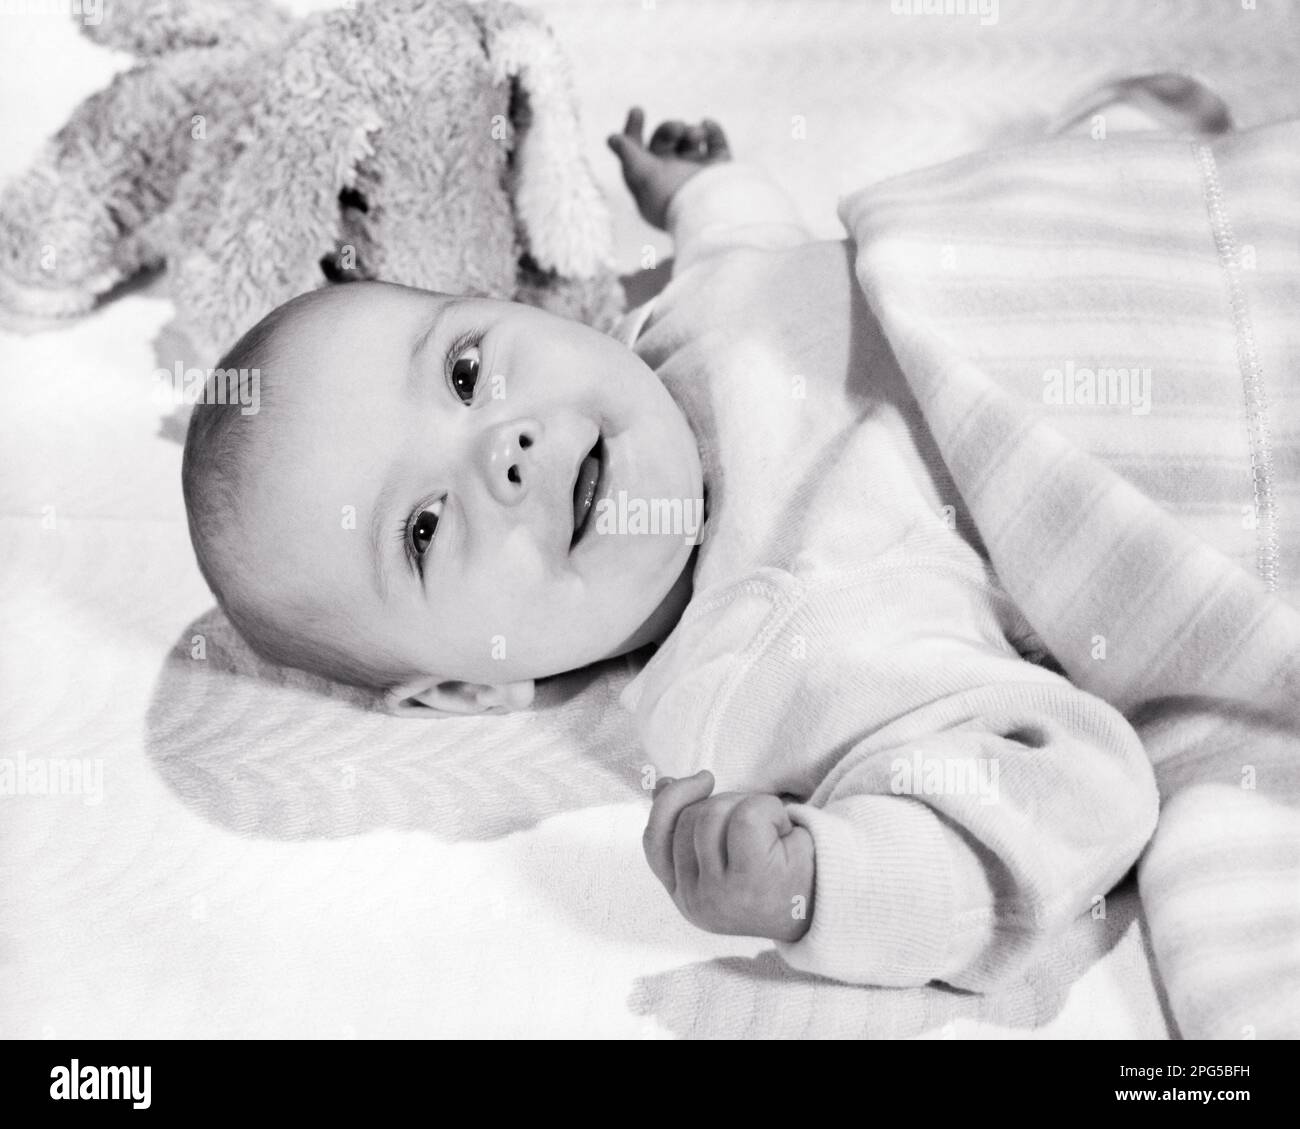 1960s SMILING BABY LYING DOWN WITH TOY AND BLANKET LOOKING UP AT CAMERA - b21396 HAR001 HARS CHEERFUL HIGH ANGLE AND EXCITEMENT UP SMILES CONNECTION JOYFUL PLEASANT AGREEABLE CHARMING GROWTH JUVENILES LOVABLE PLEASING ADORABLE APPEALING BABY GIRL BLACK AND WHITE CAUCASIAN ETHNICITY HAR001 OLD FASHIONED Stock Photo